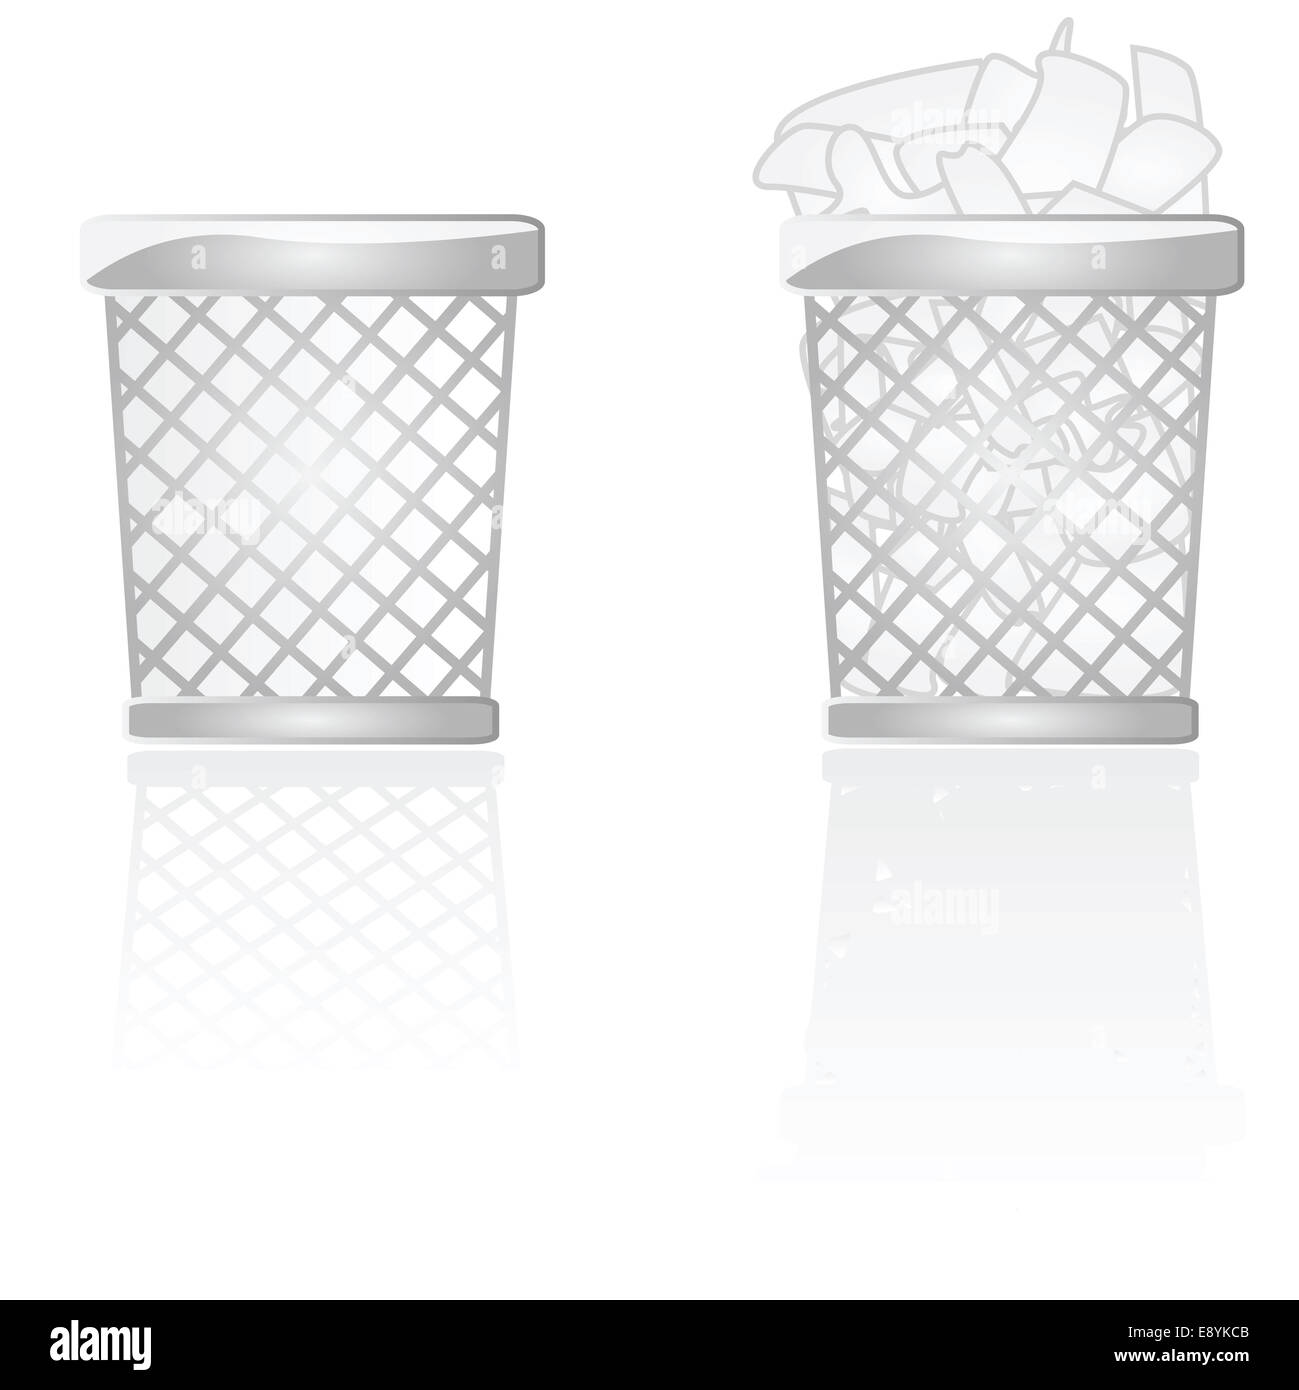 Garbage cans Stock Photo